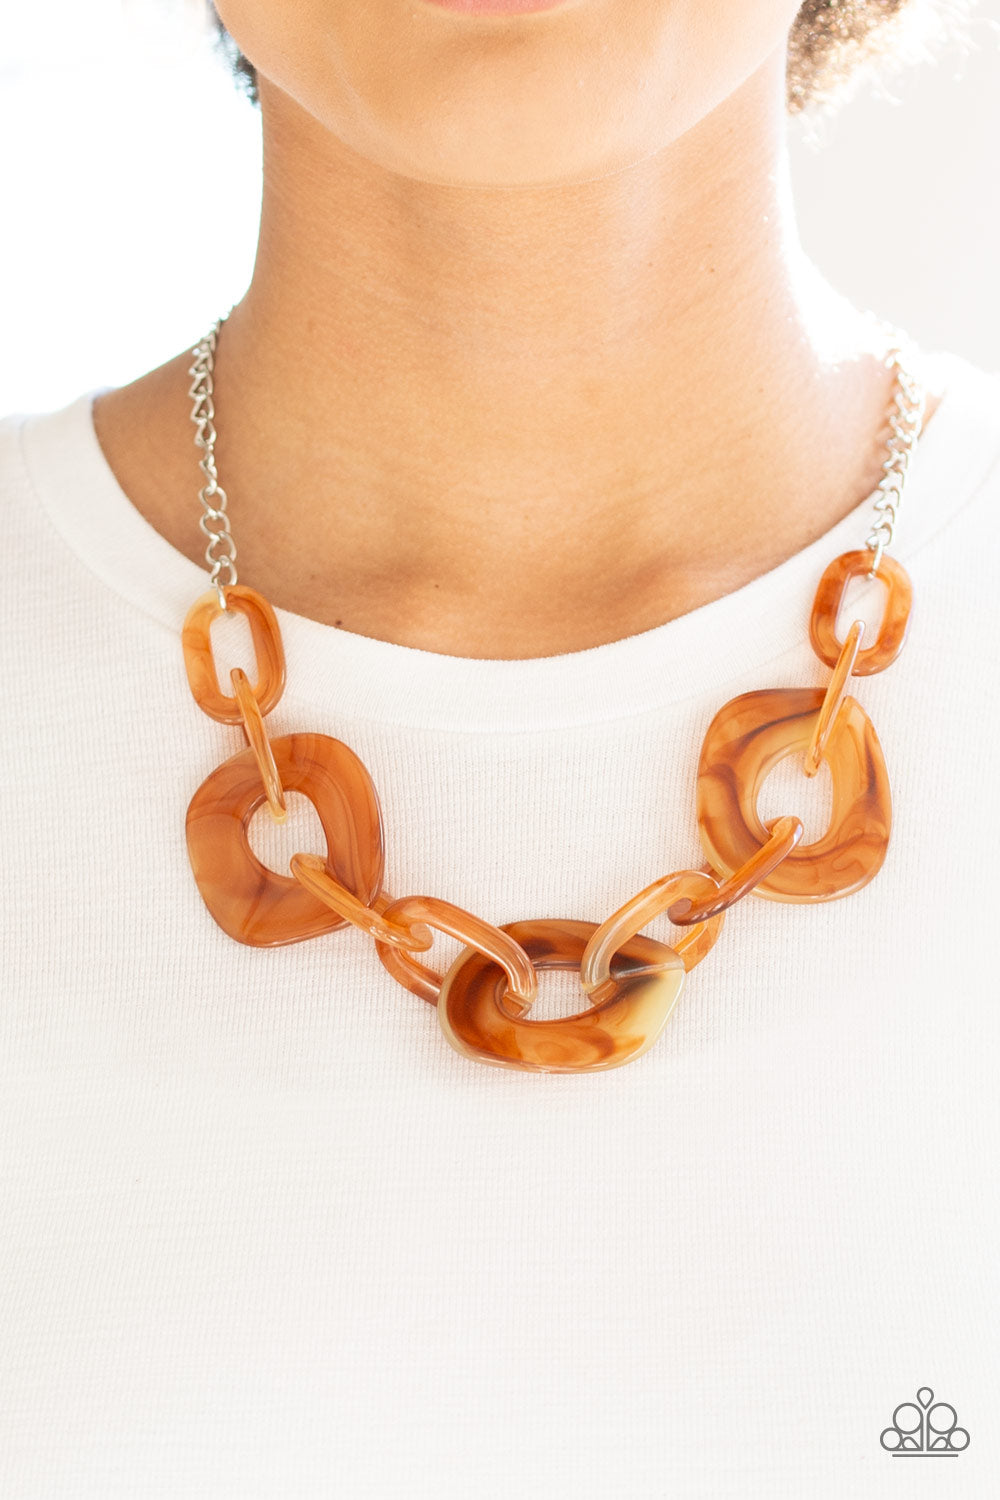 Paparazzi Accessories Courageously Chromatic - Brown Necklaces - Lady T Accessories